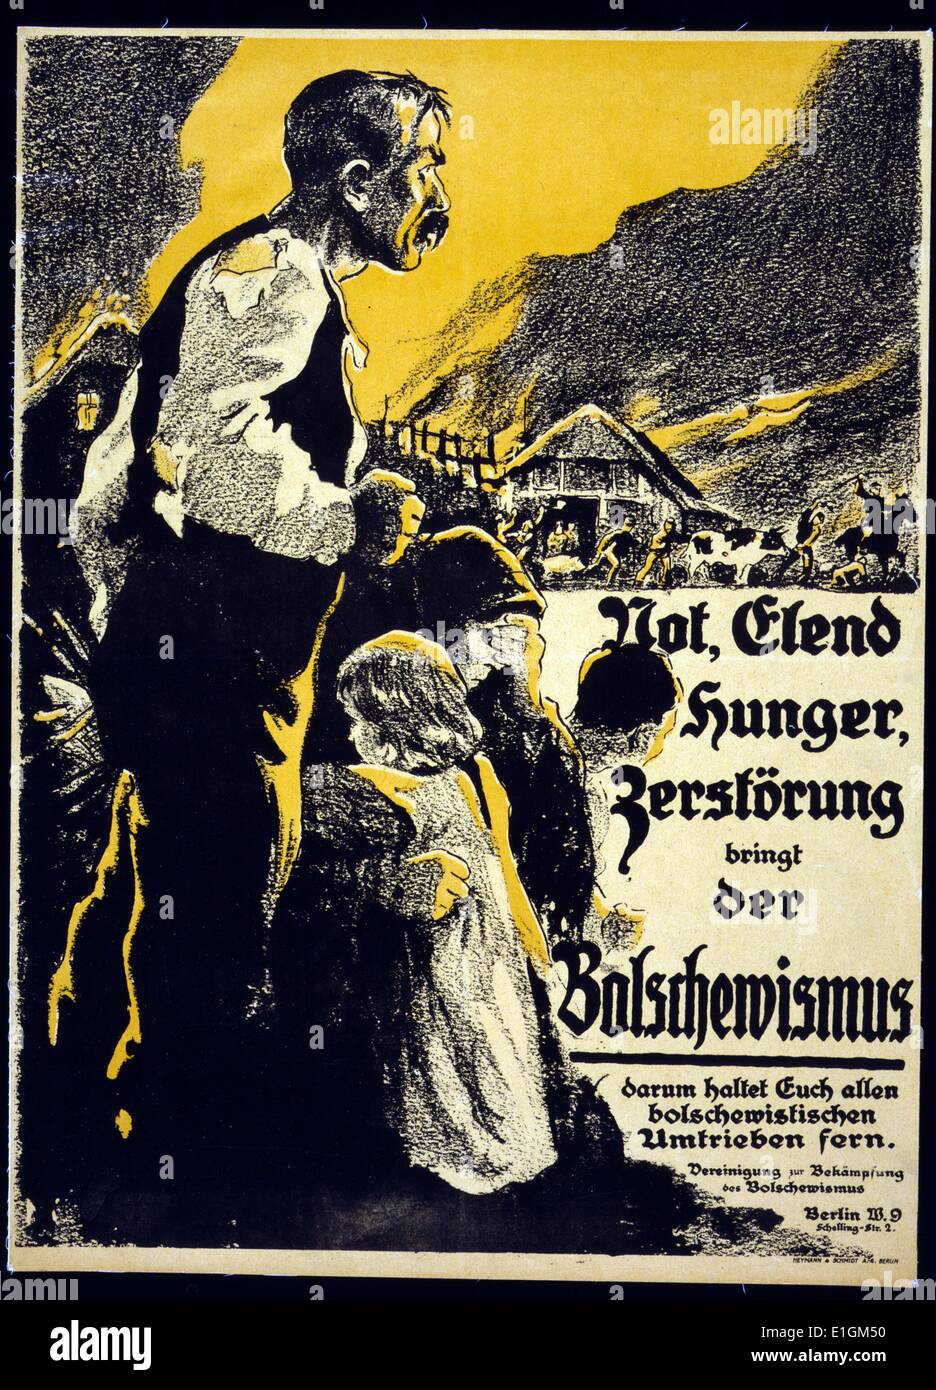 Weimar Republic Gerany; poster depicting a family watching in distress as their farm is burned and animals confiscated. (Not, Elend, Hunger, Zerstörung bringt der Bolschewismus); Bolshevism brings distress, adversity, hunger and destruction. Stock Photo